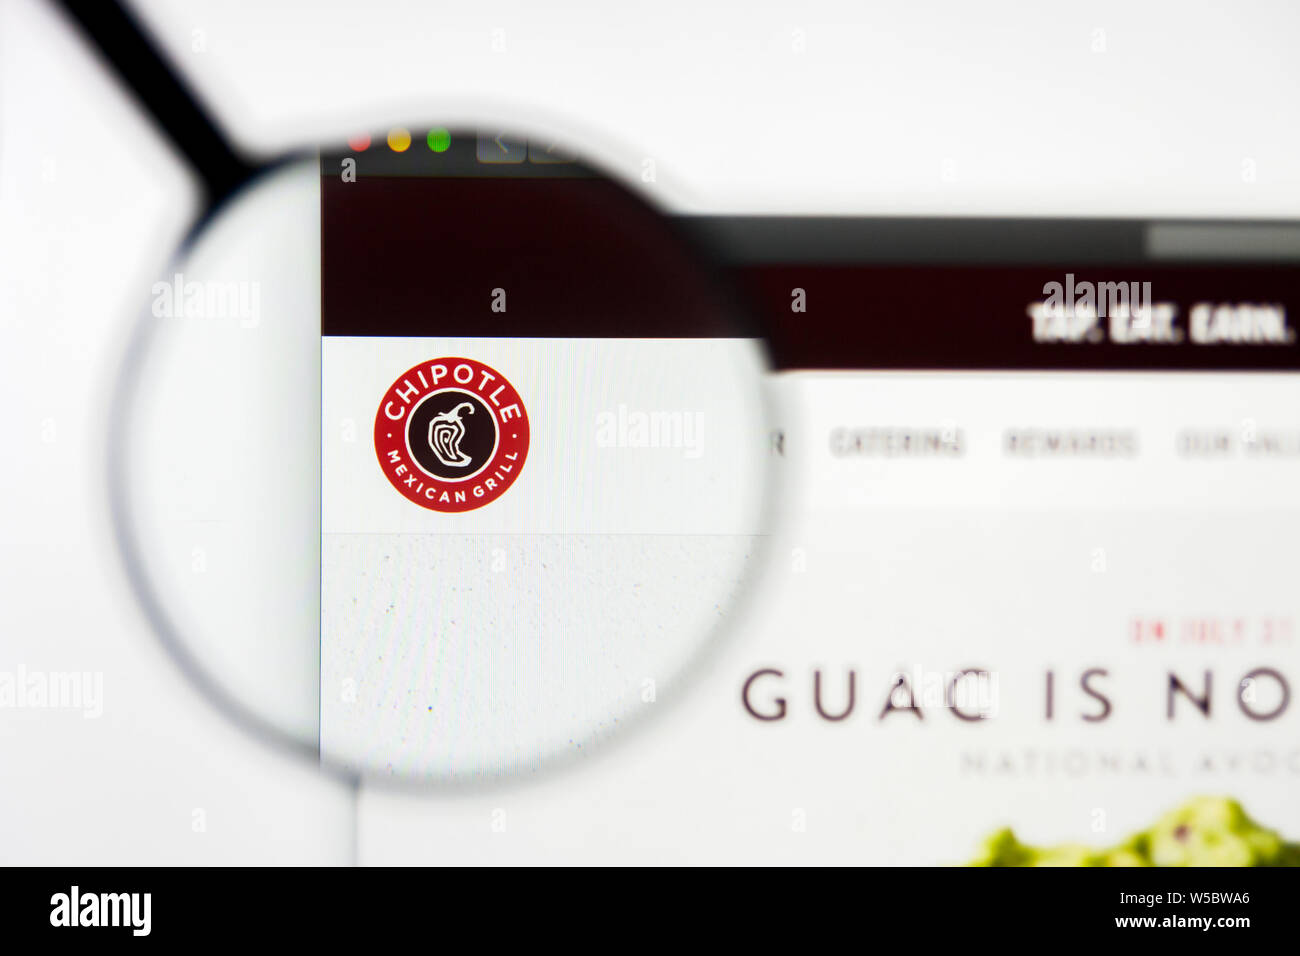 Richmond, Virginia, USA - 27 July 2019: Illustrative Editorial of Chipotle Mexican Grill Inc website homepage. Chipotle Mexican Grill Inc logo visible Stock Photo